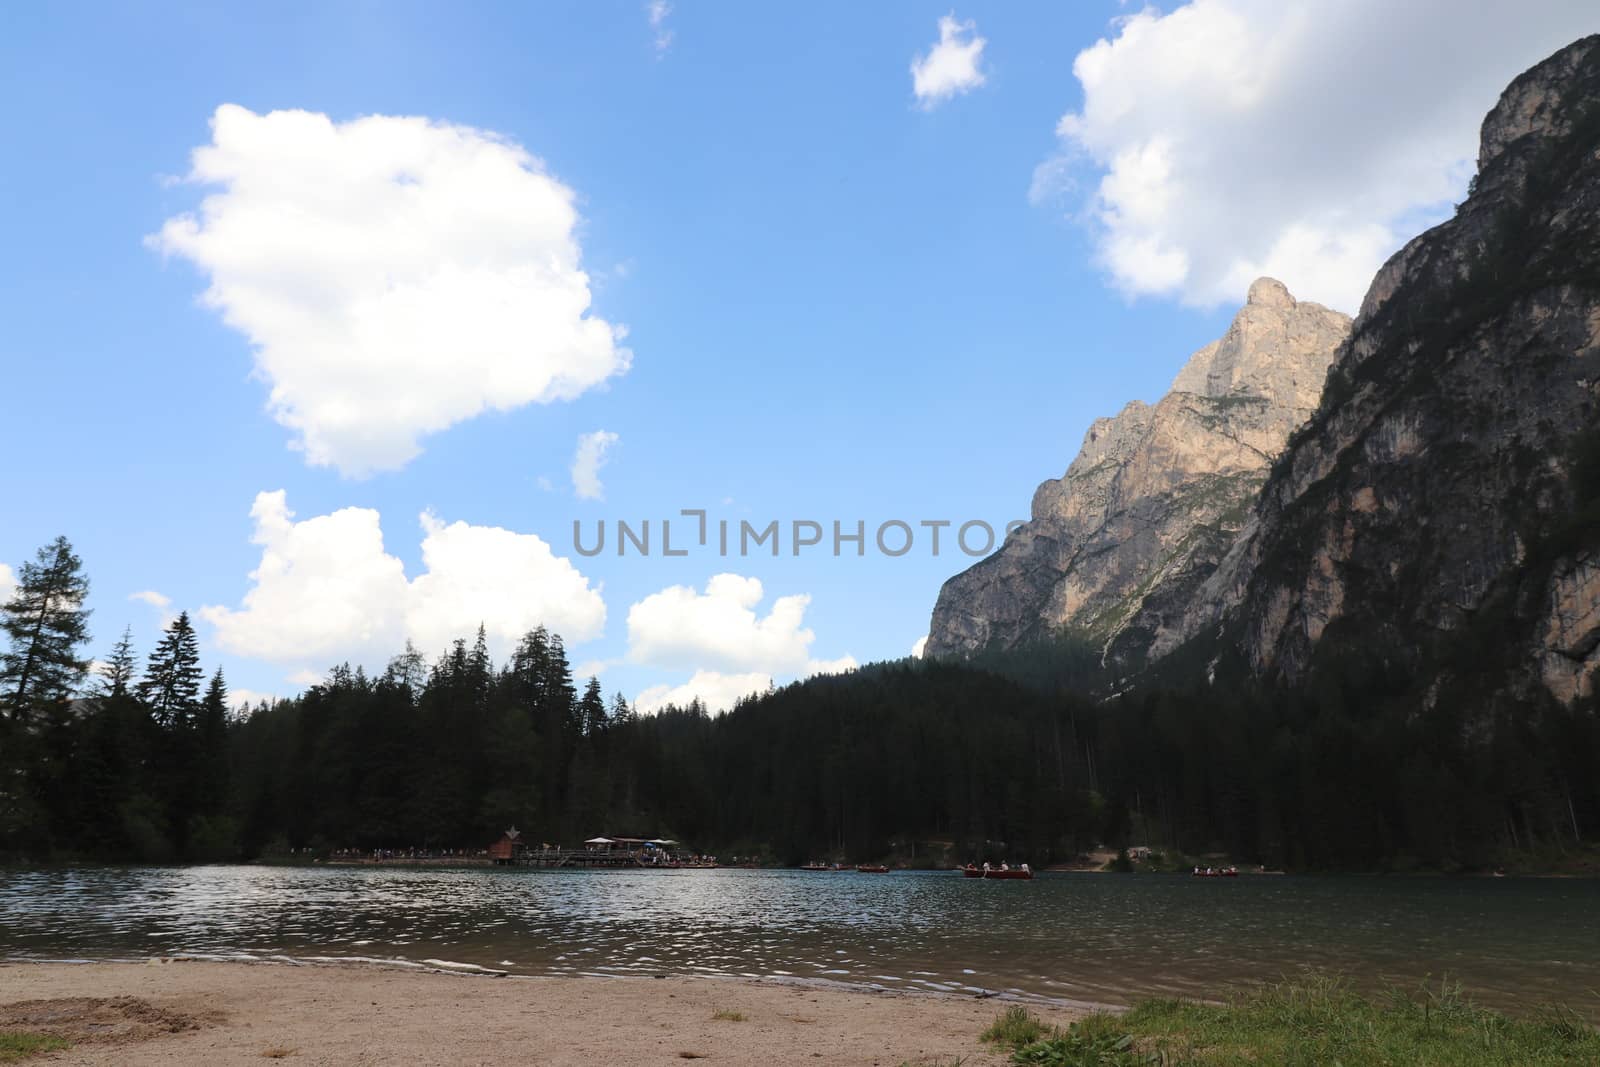 Braies lake at summer. Largest natural lake in Dolomites, South Tyrol, Italy, Europe. Beauty of nature background.